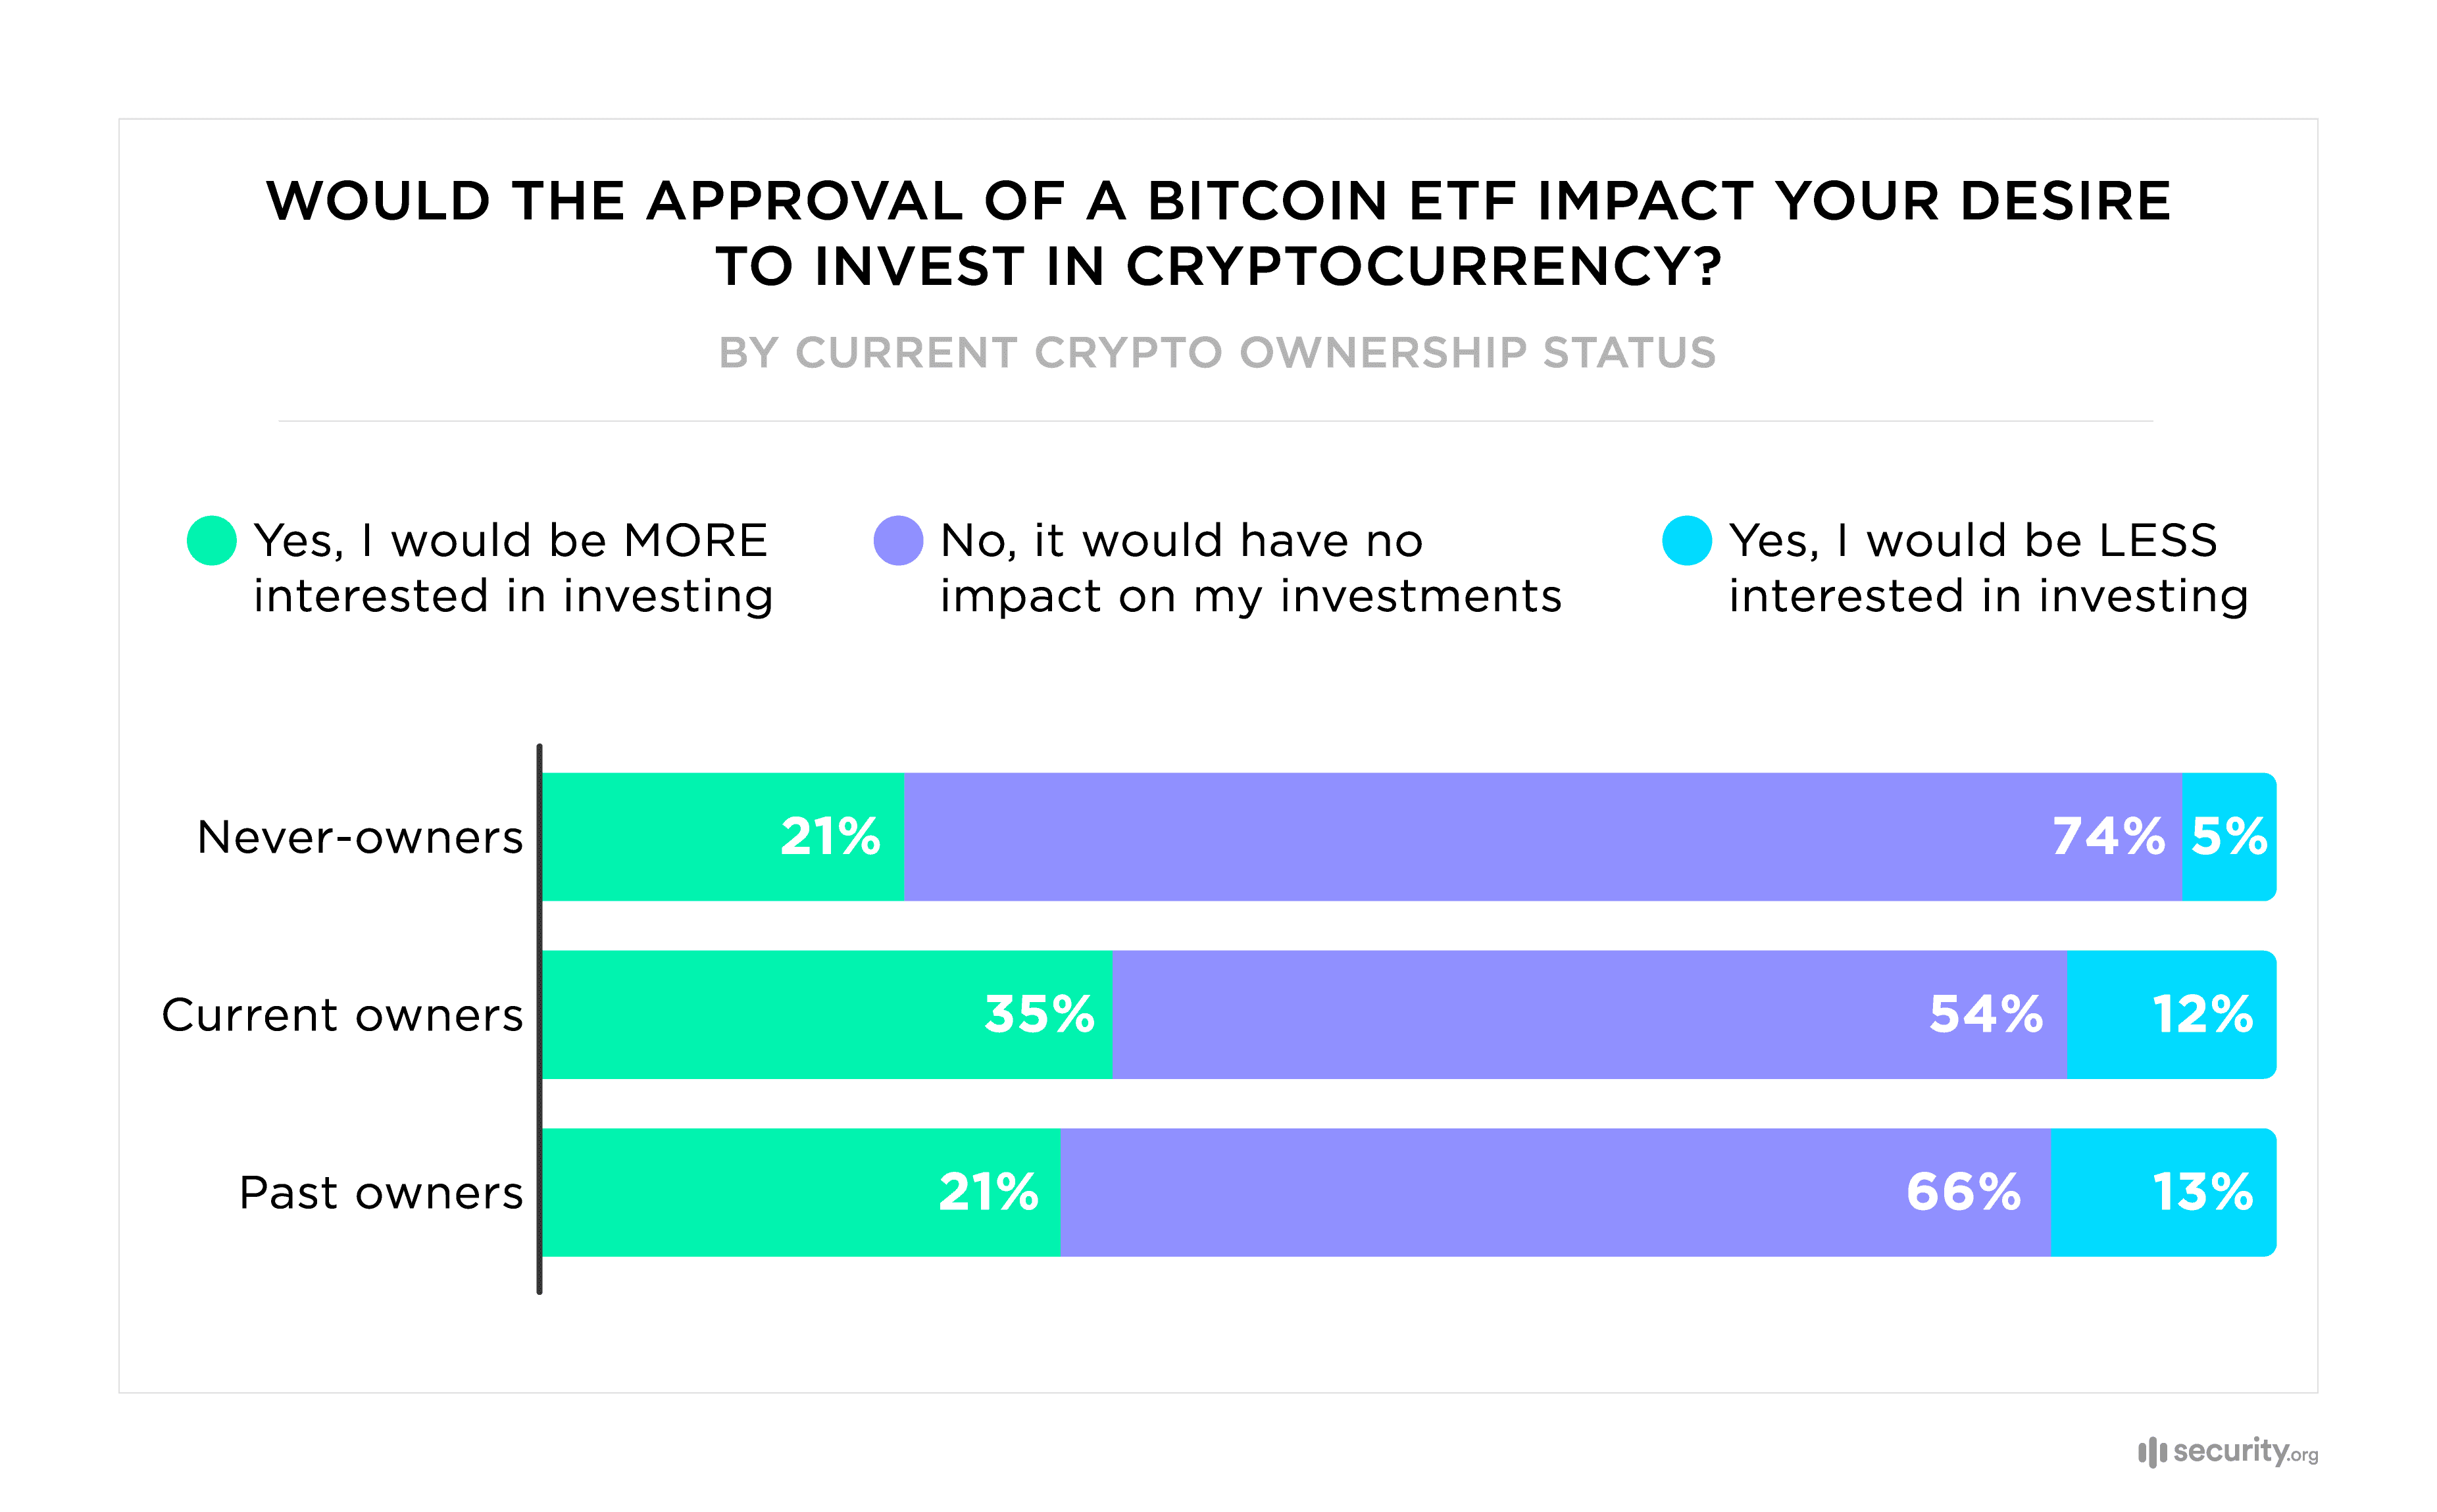 Would the Approval of a Bitcoin ETF Impact Your Desire to Invest in Cryptocurrency